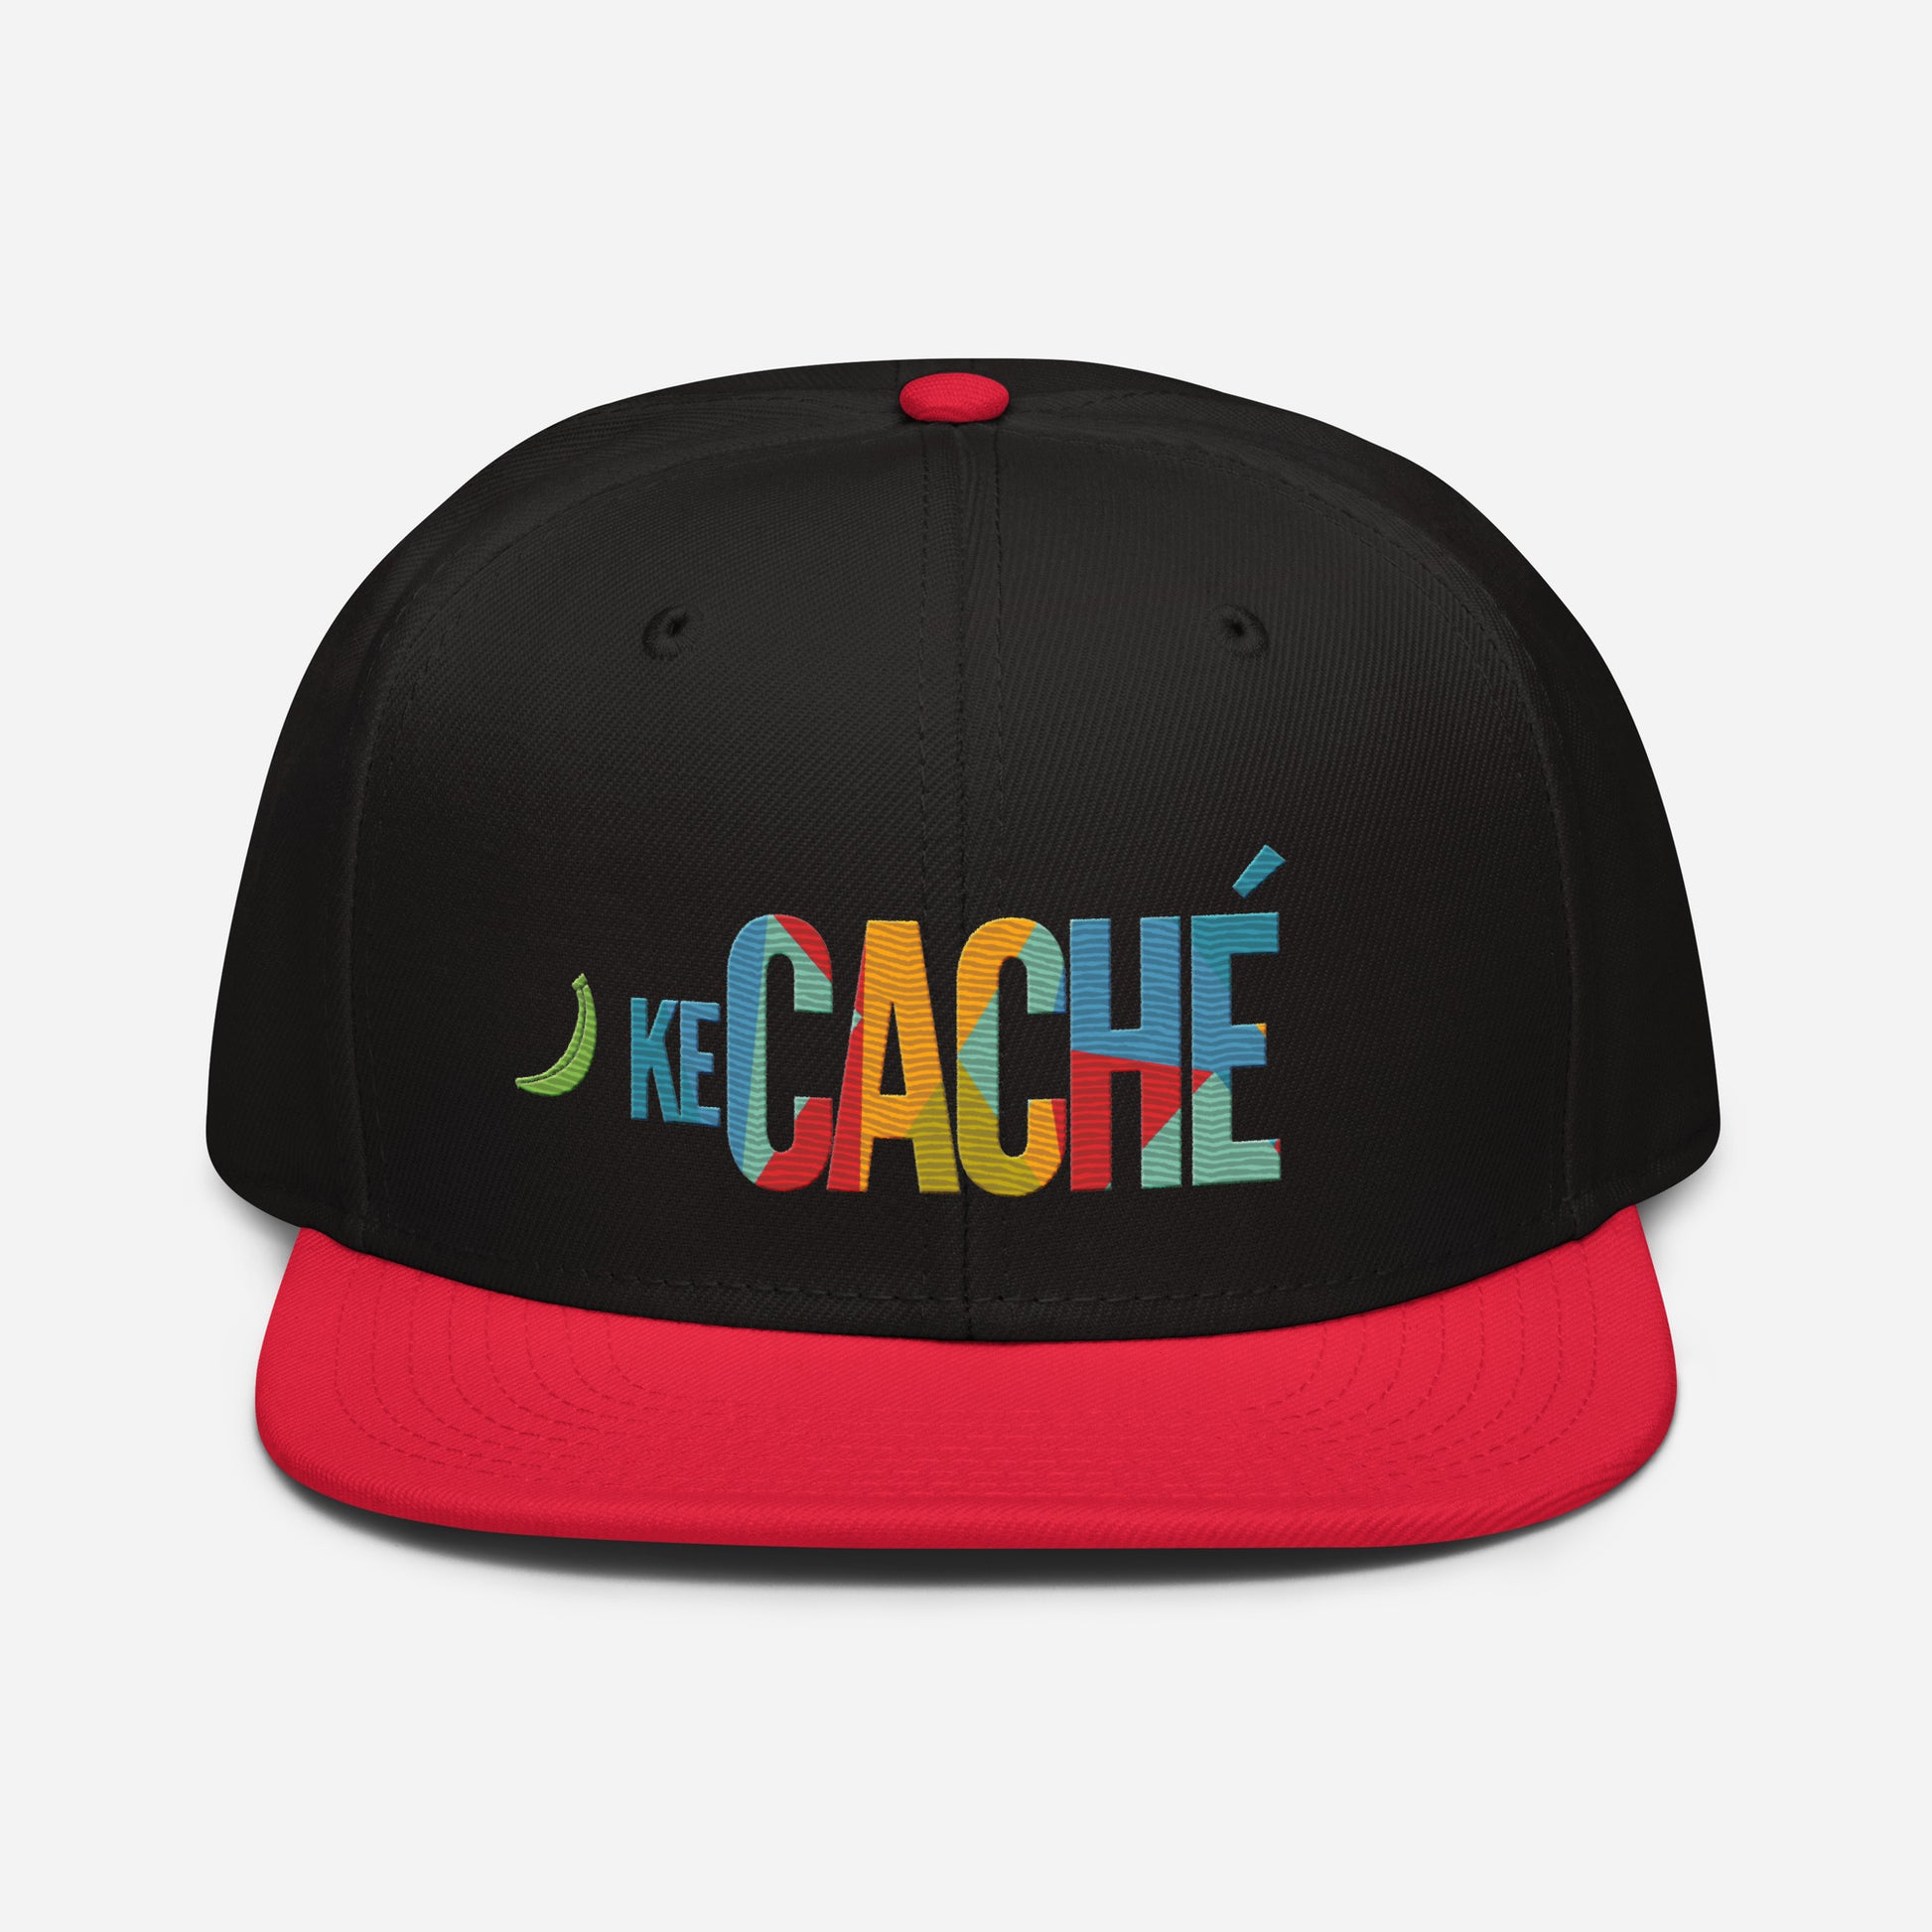  KeCaché Dominican Minimal and Colorful Snapback Hat - Black Red